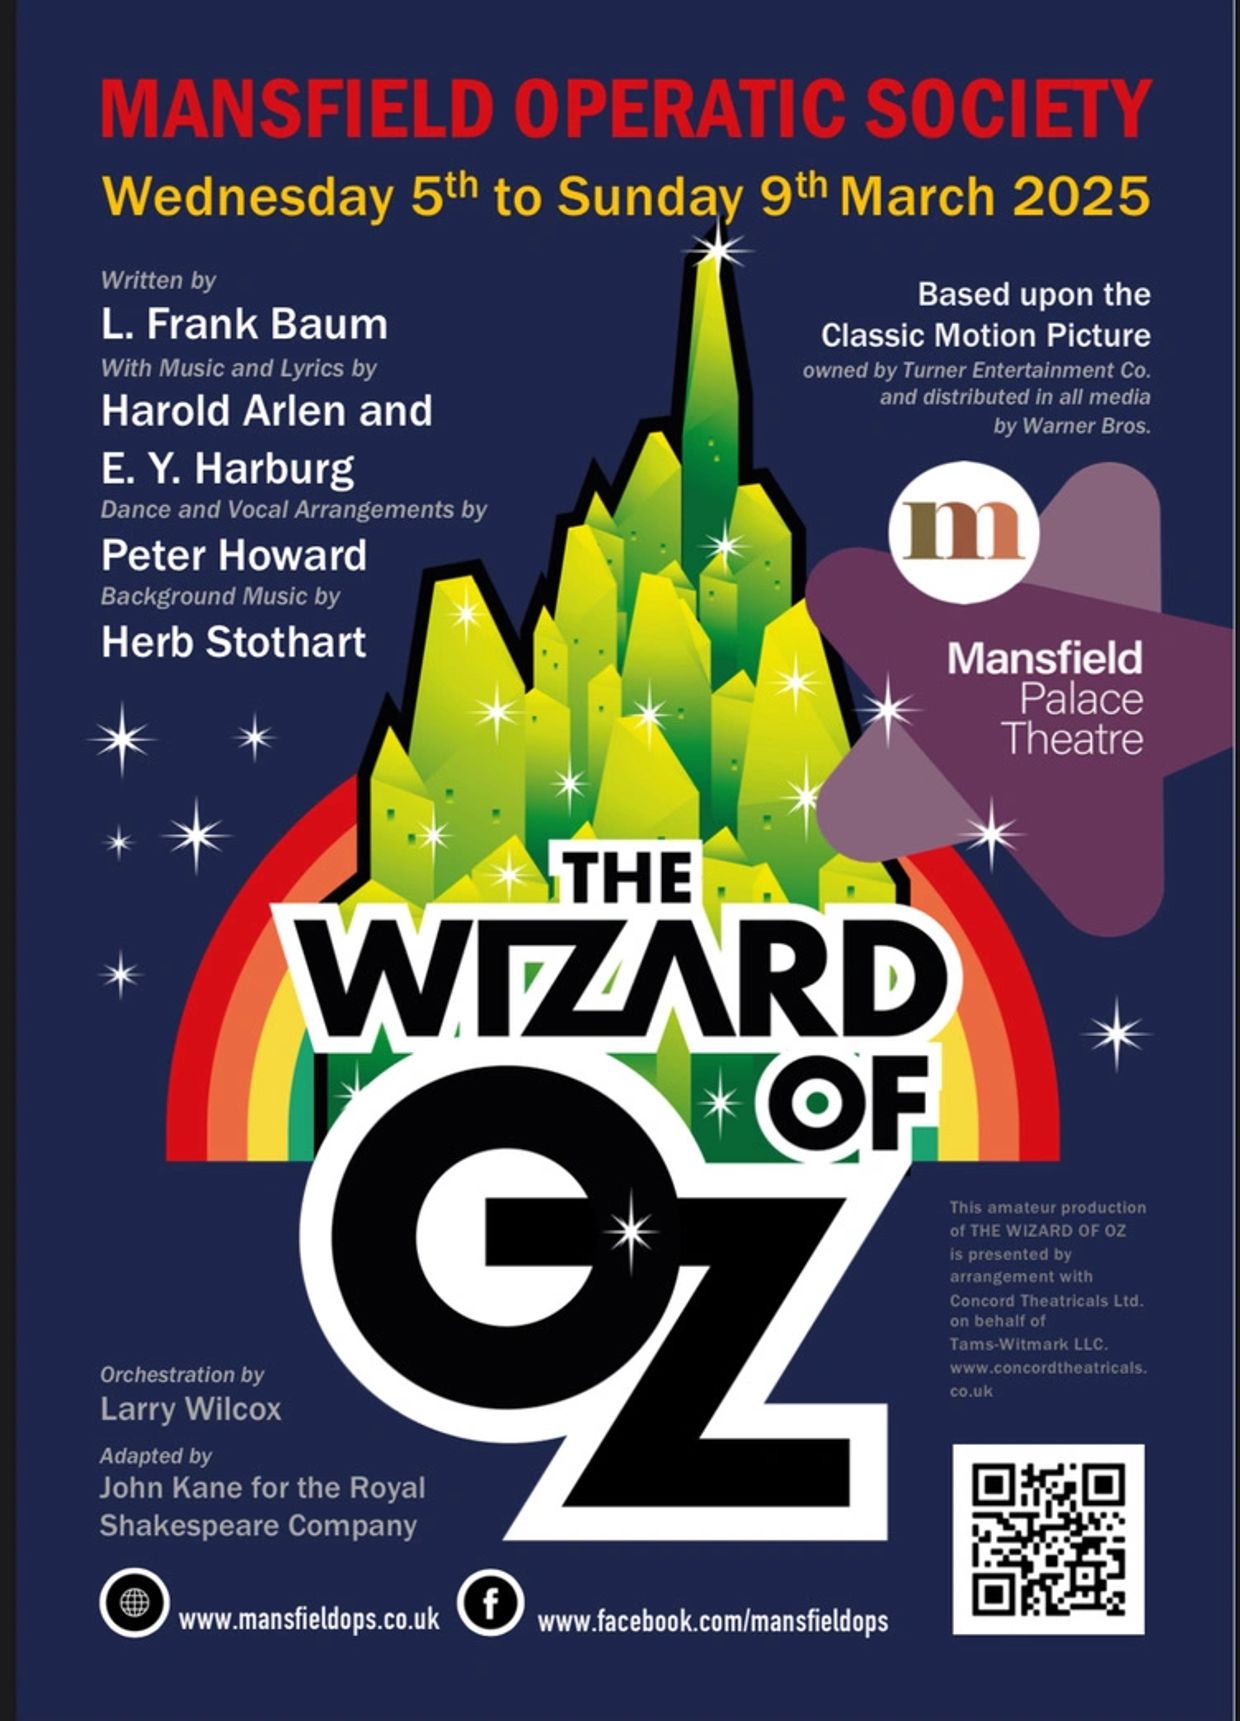 Our 2025 production will be The Wizard of OZ.